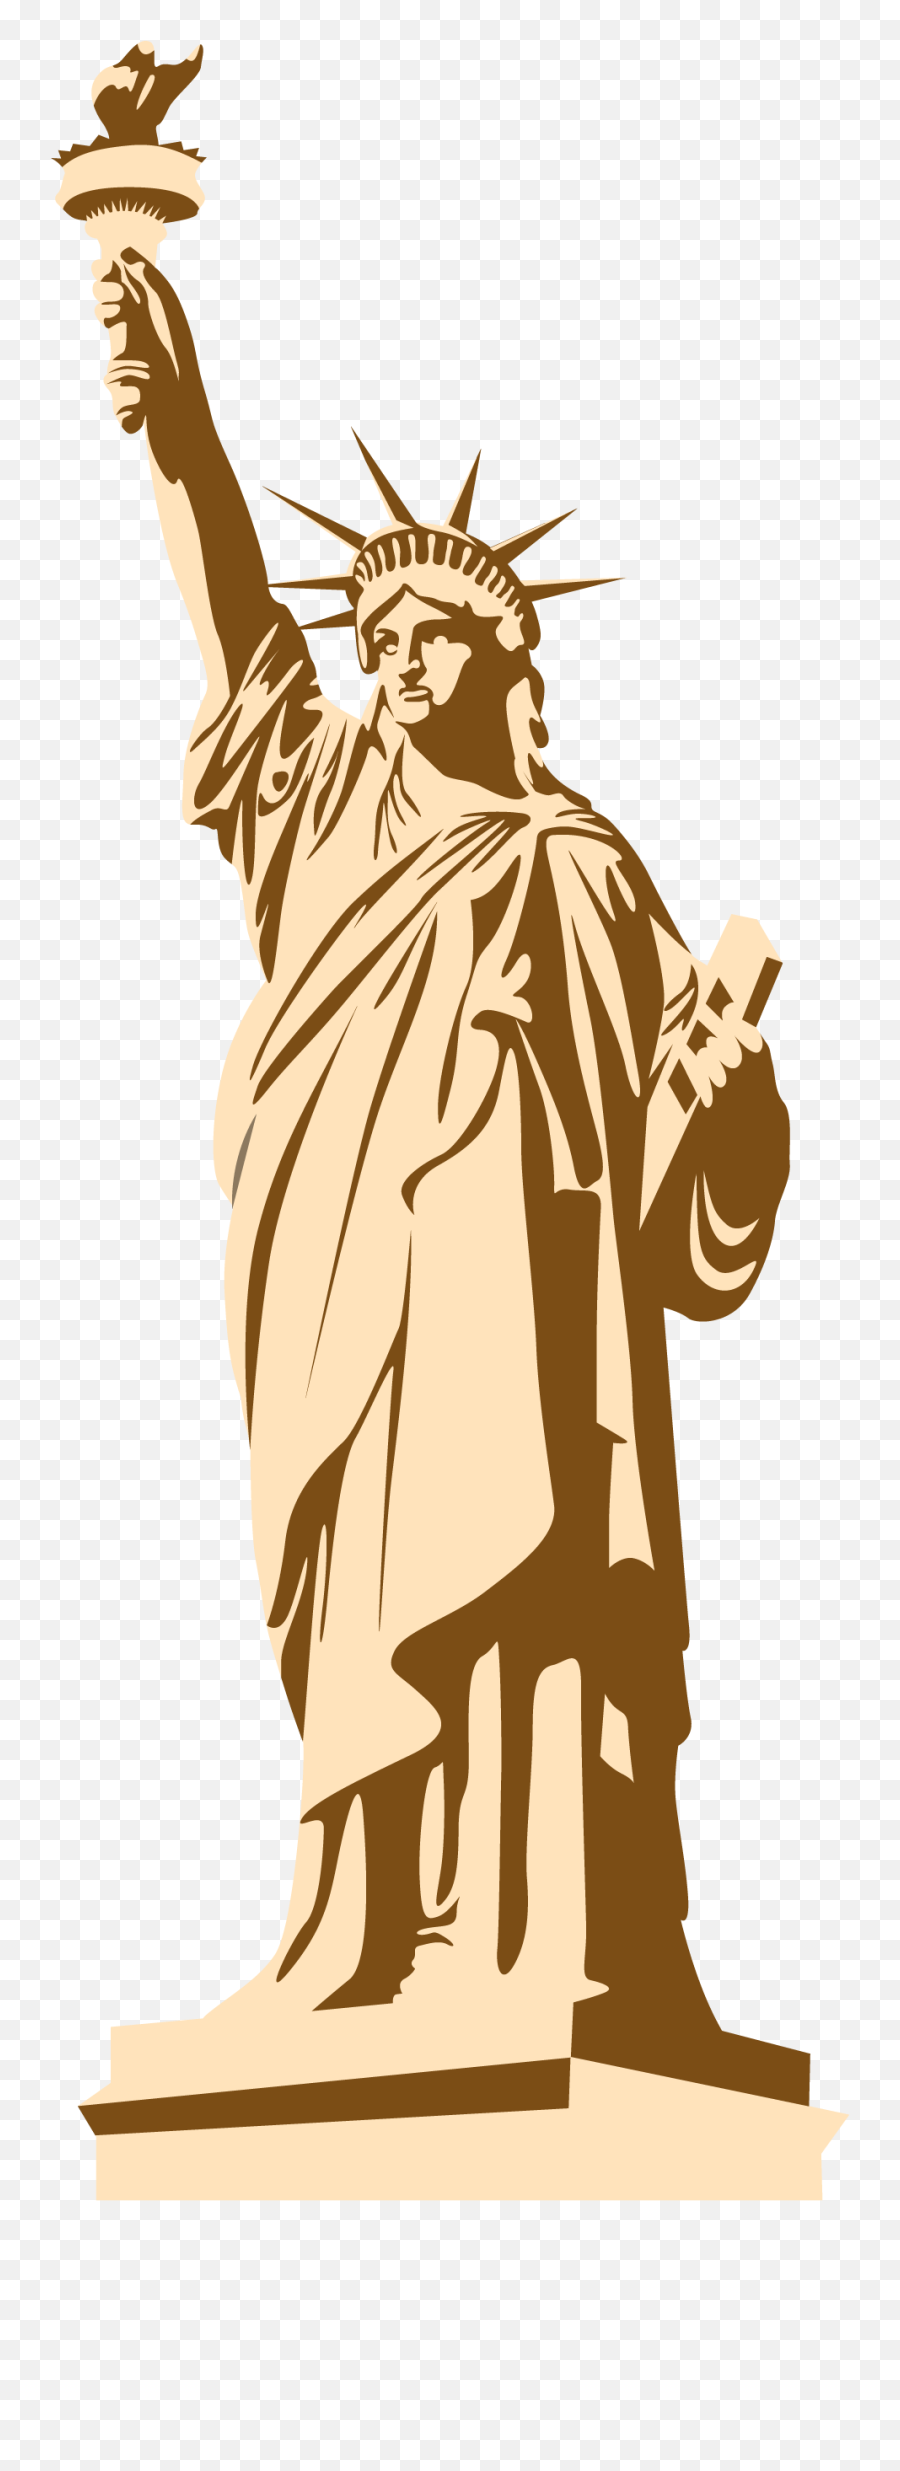 Statue Of Liberty Png Transparent Free - Statue Of Liberty Crown Transparent,Statue Of Liberty Transparent